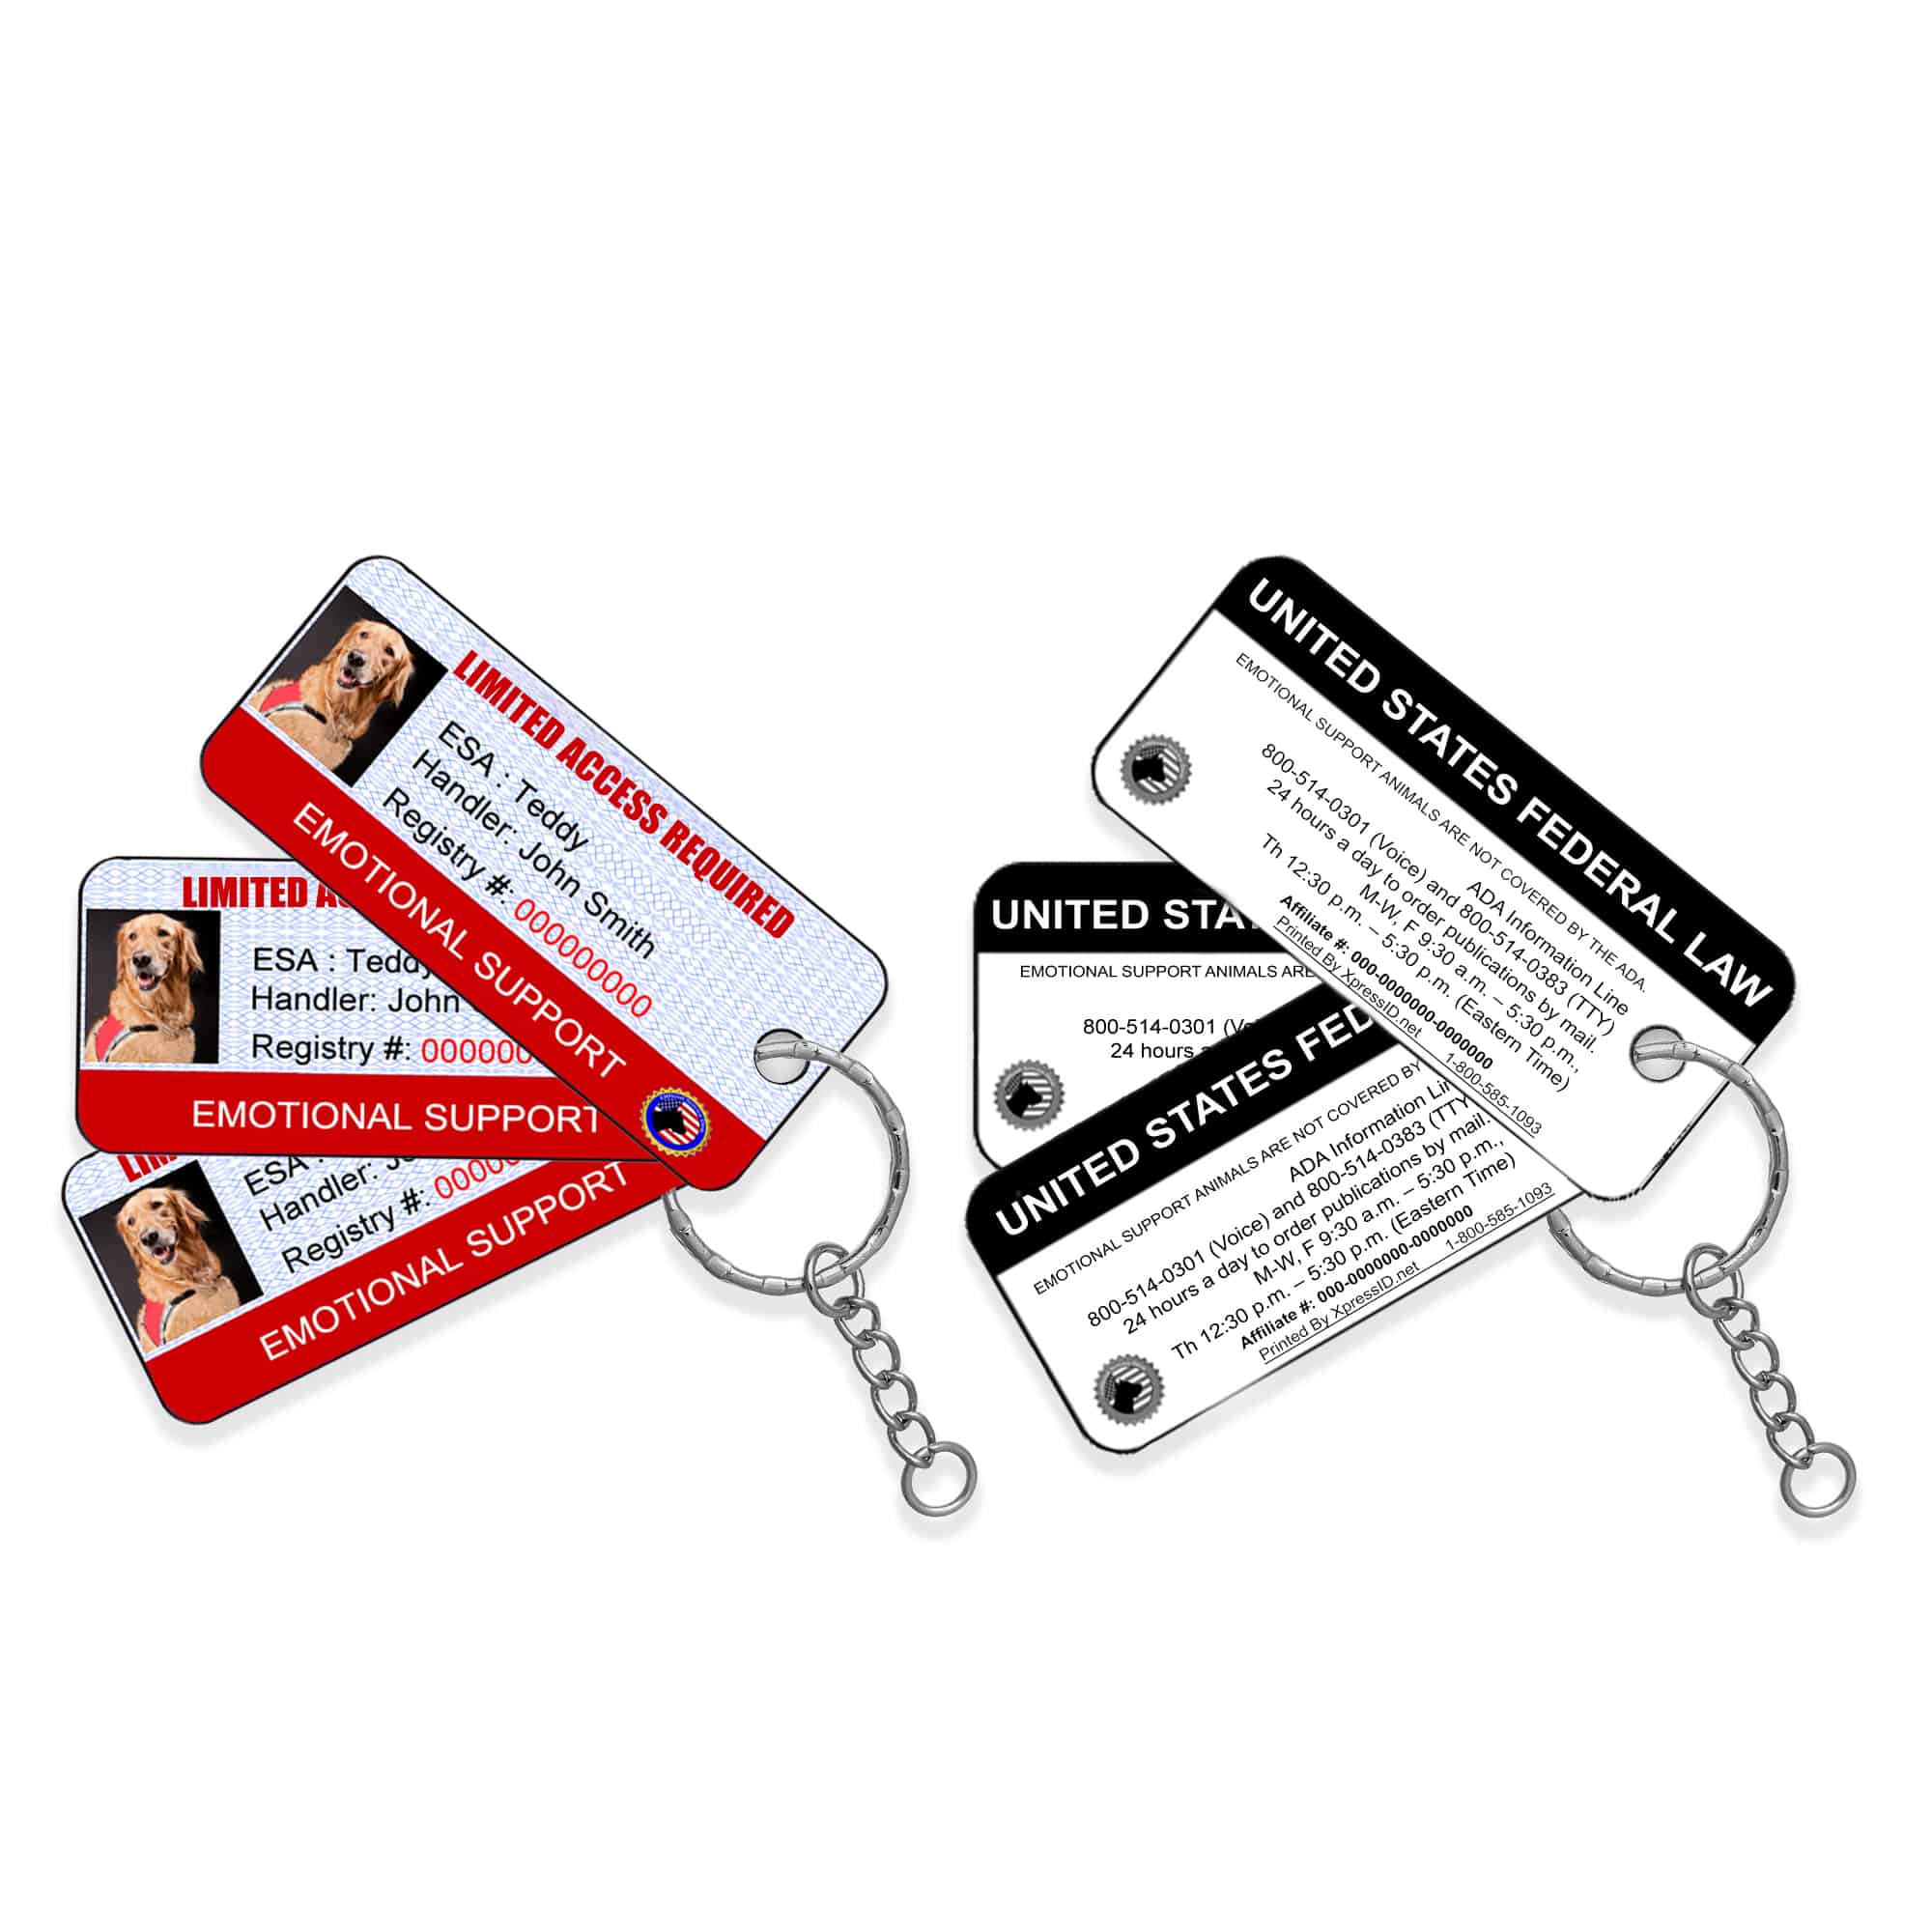 Emotional Support Key Tags - Service Animal Badge